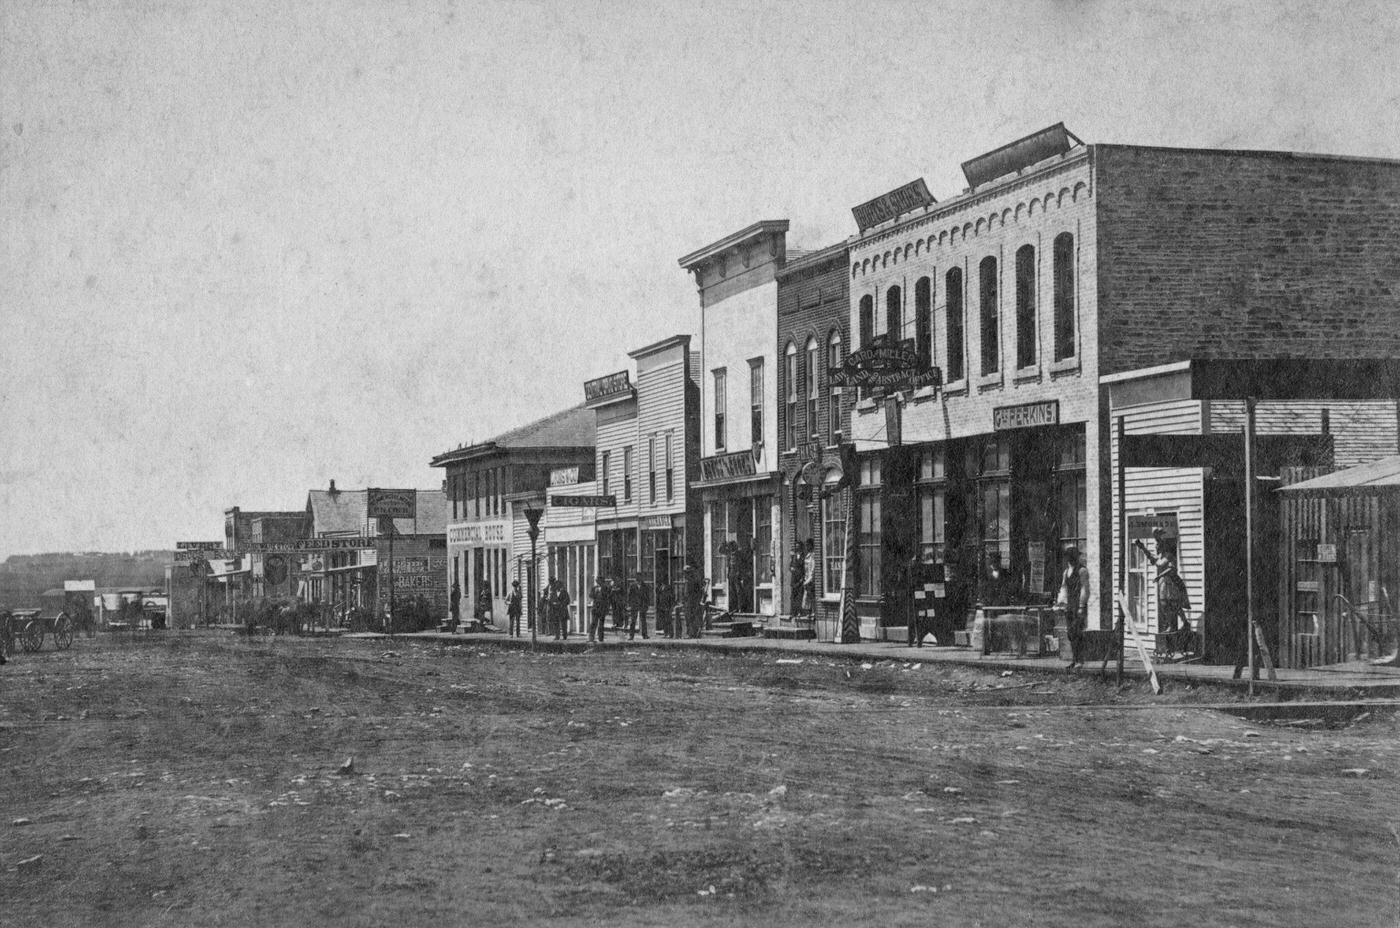 Unidentified Western Frontier Town, view of buildings, in a small frontier town on the Plains, during America's westward expansion era, nineteenth century.